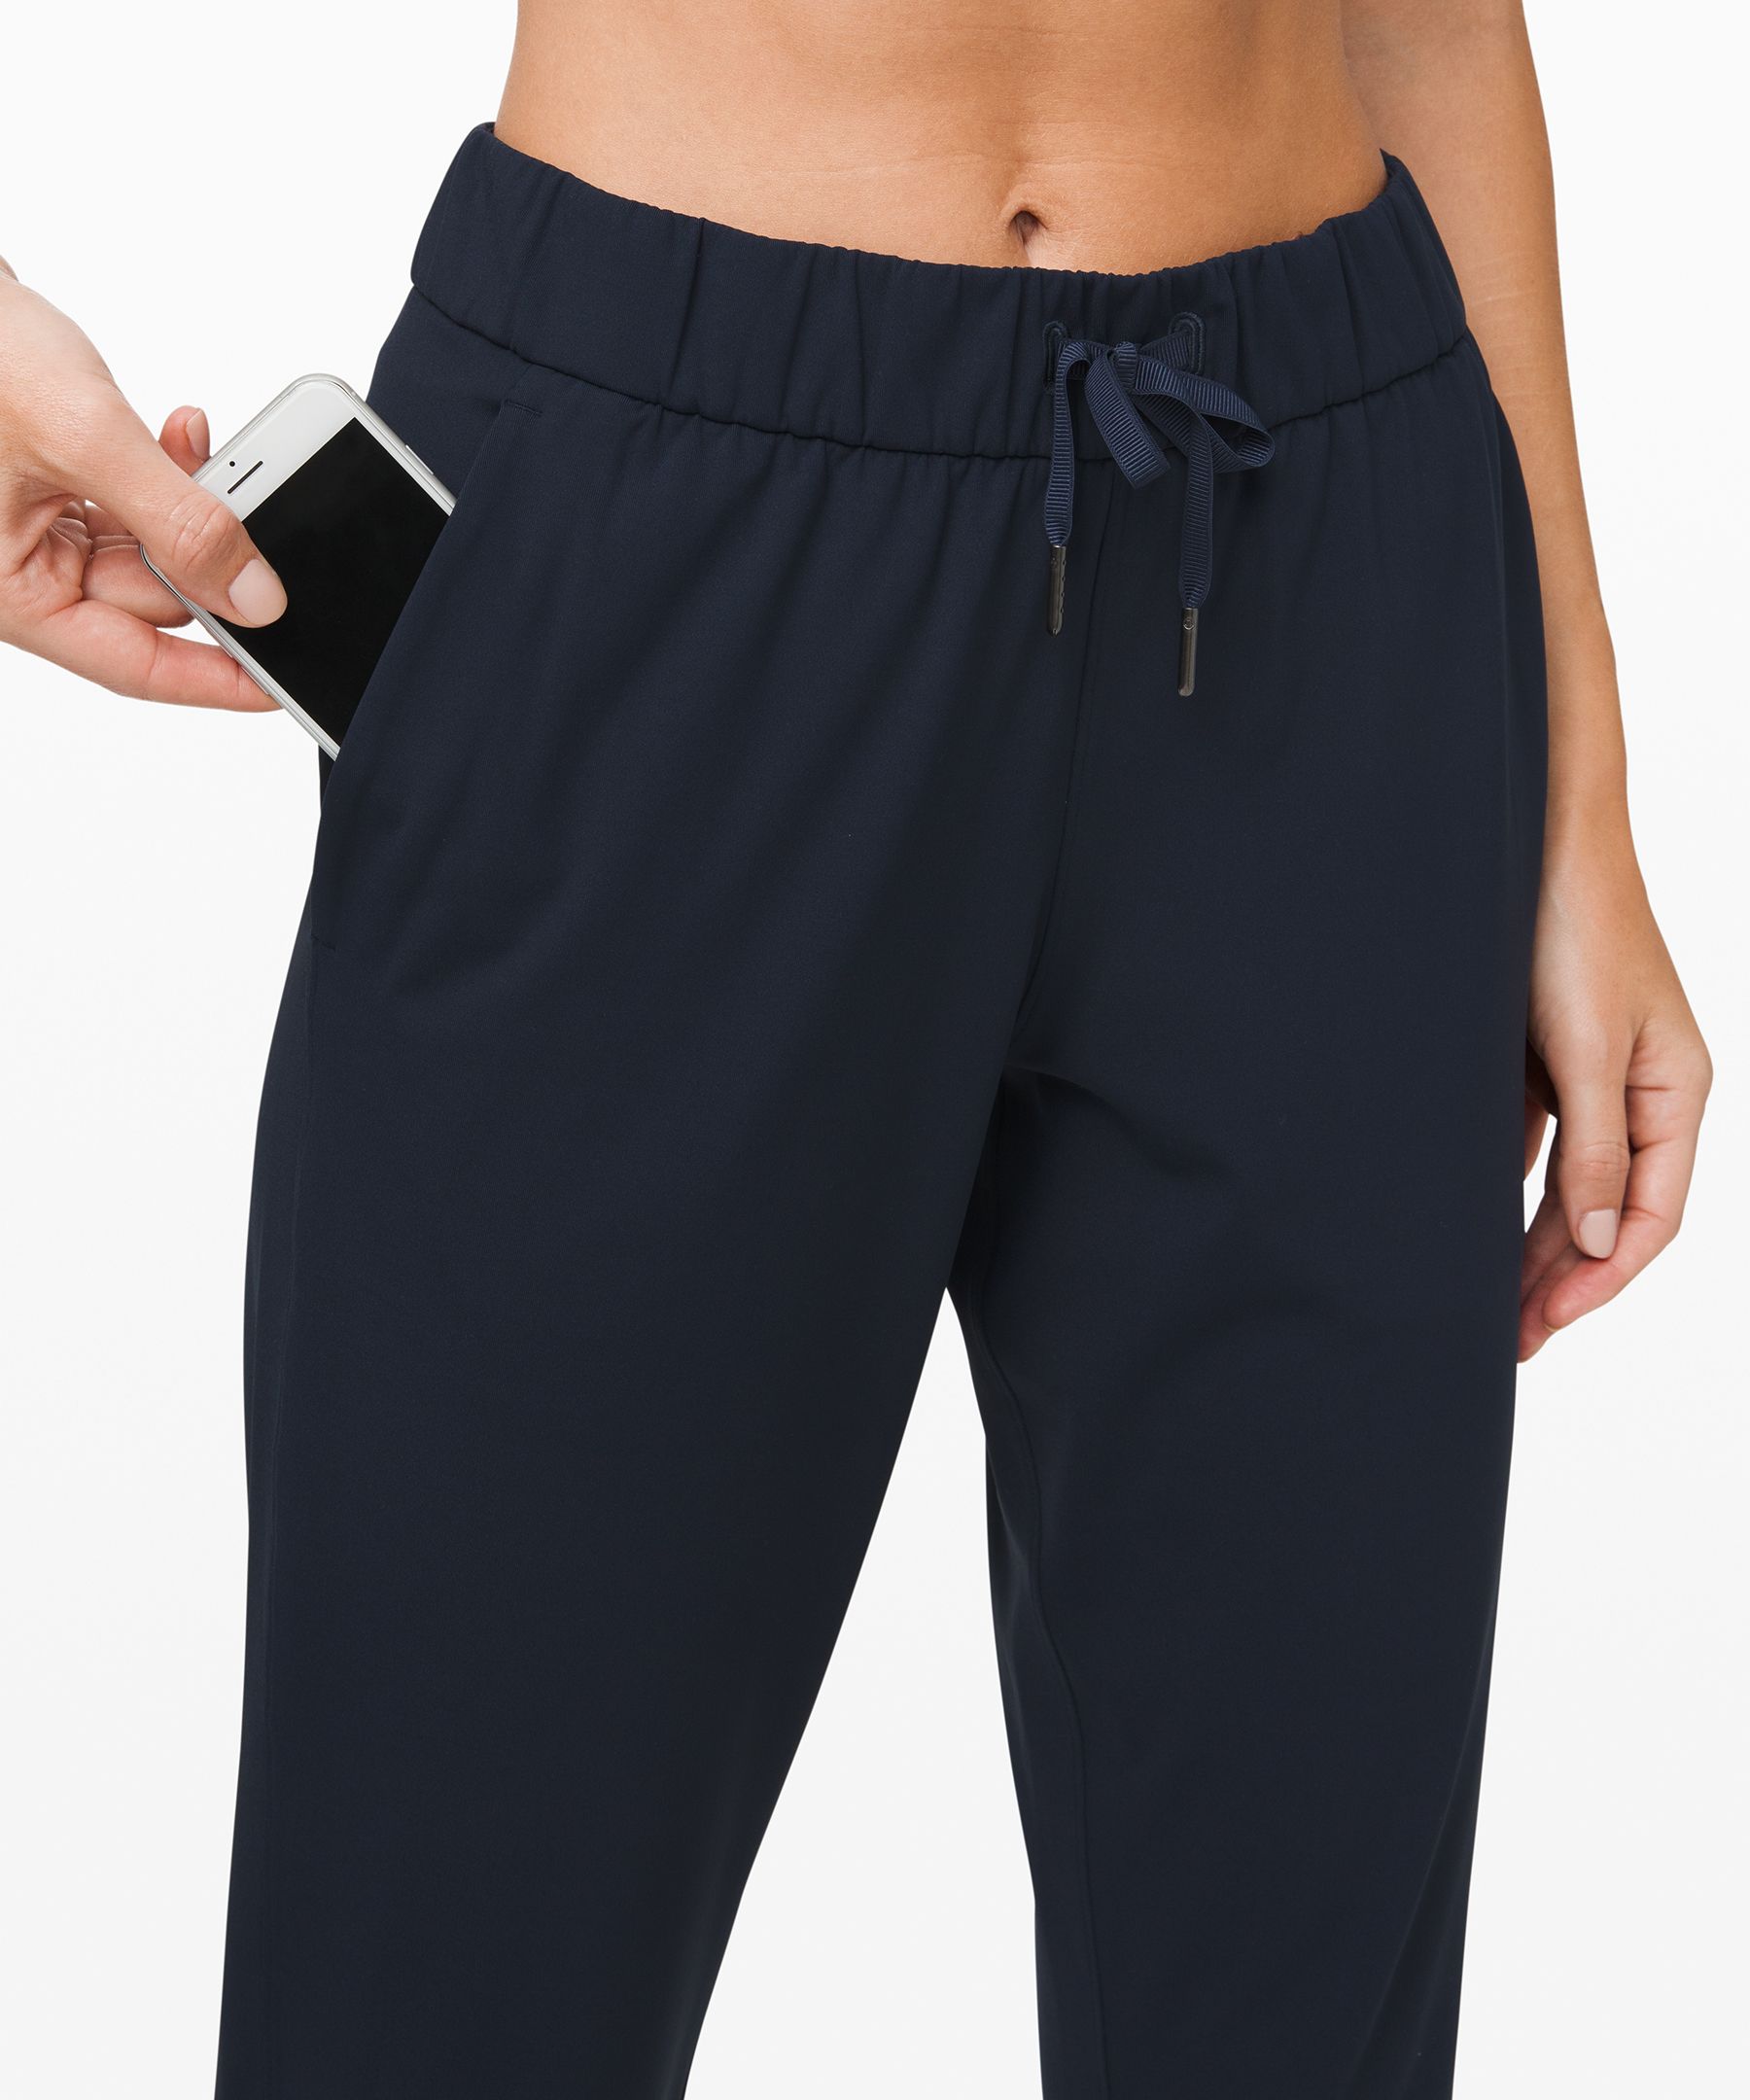 Lulu On The Fly Jogger Woven Pants For Women